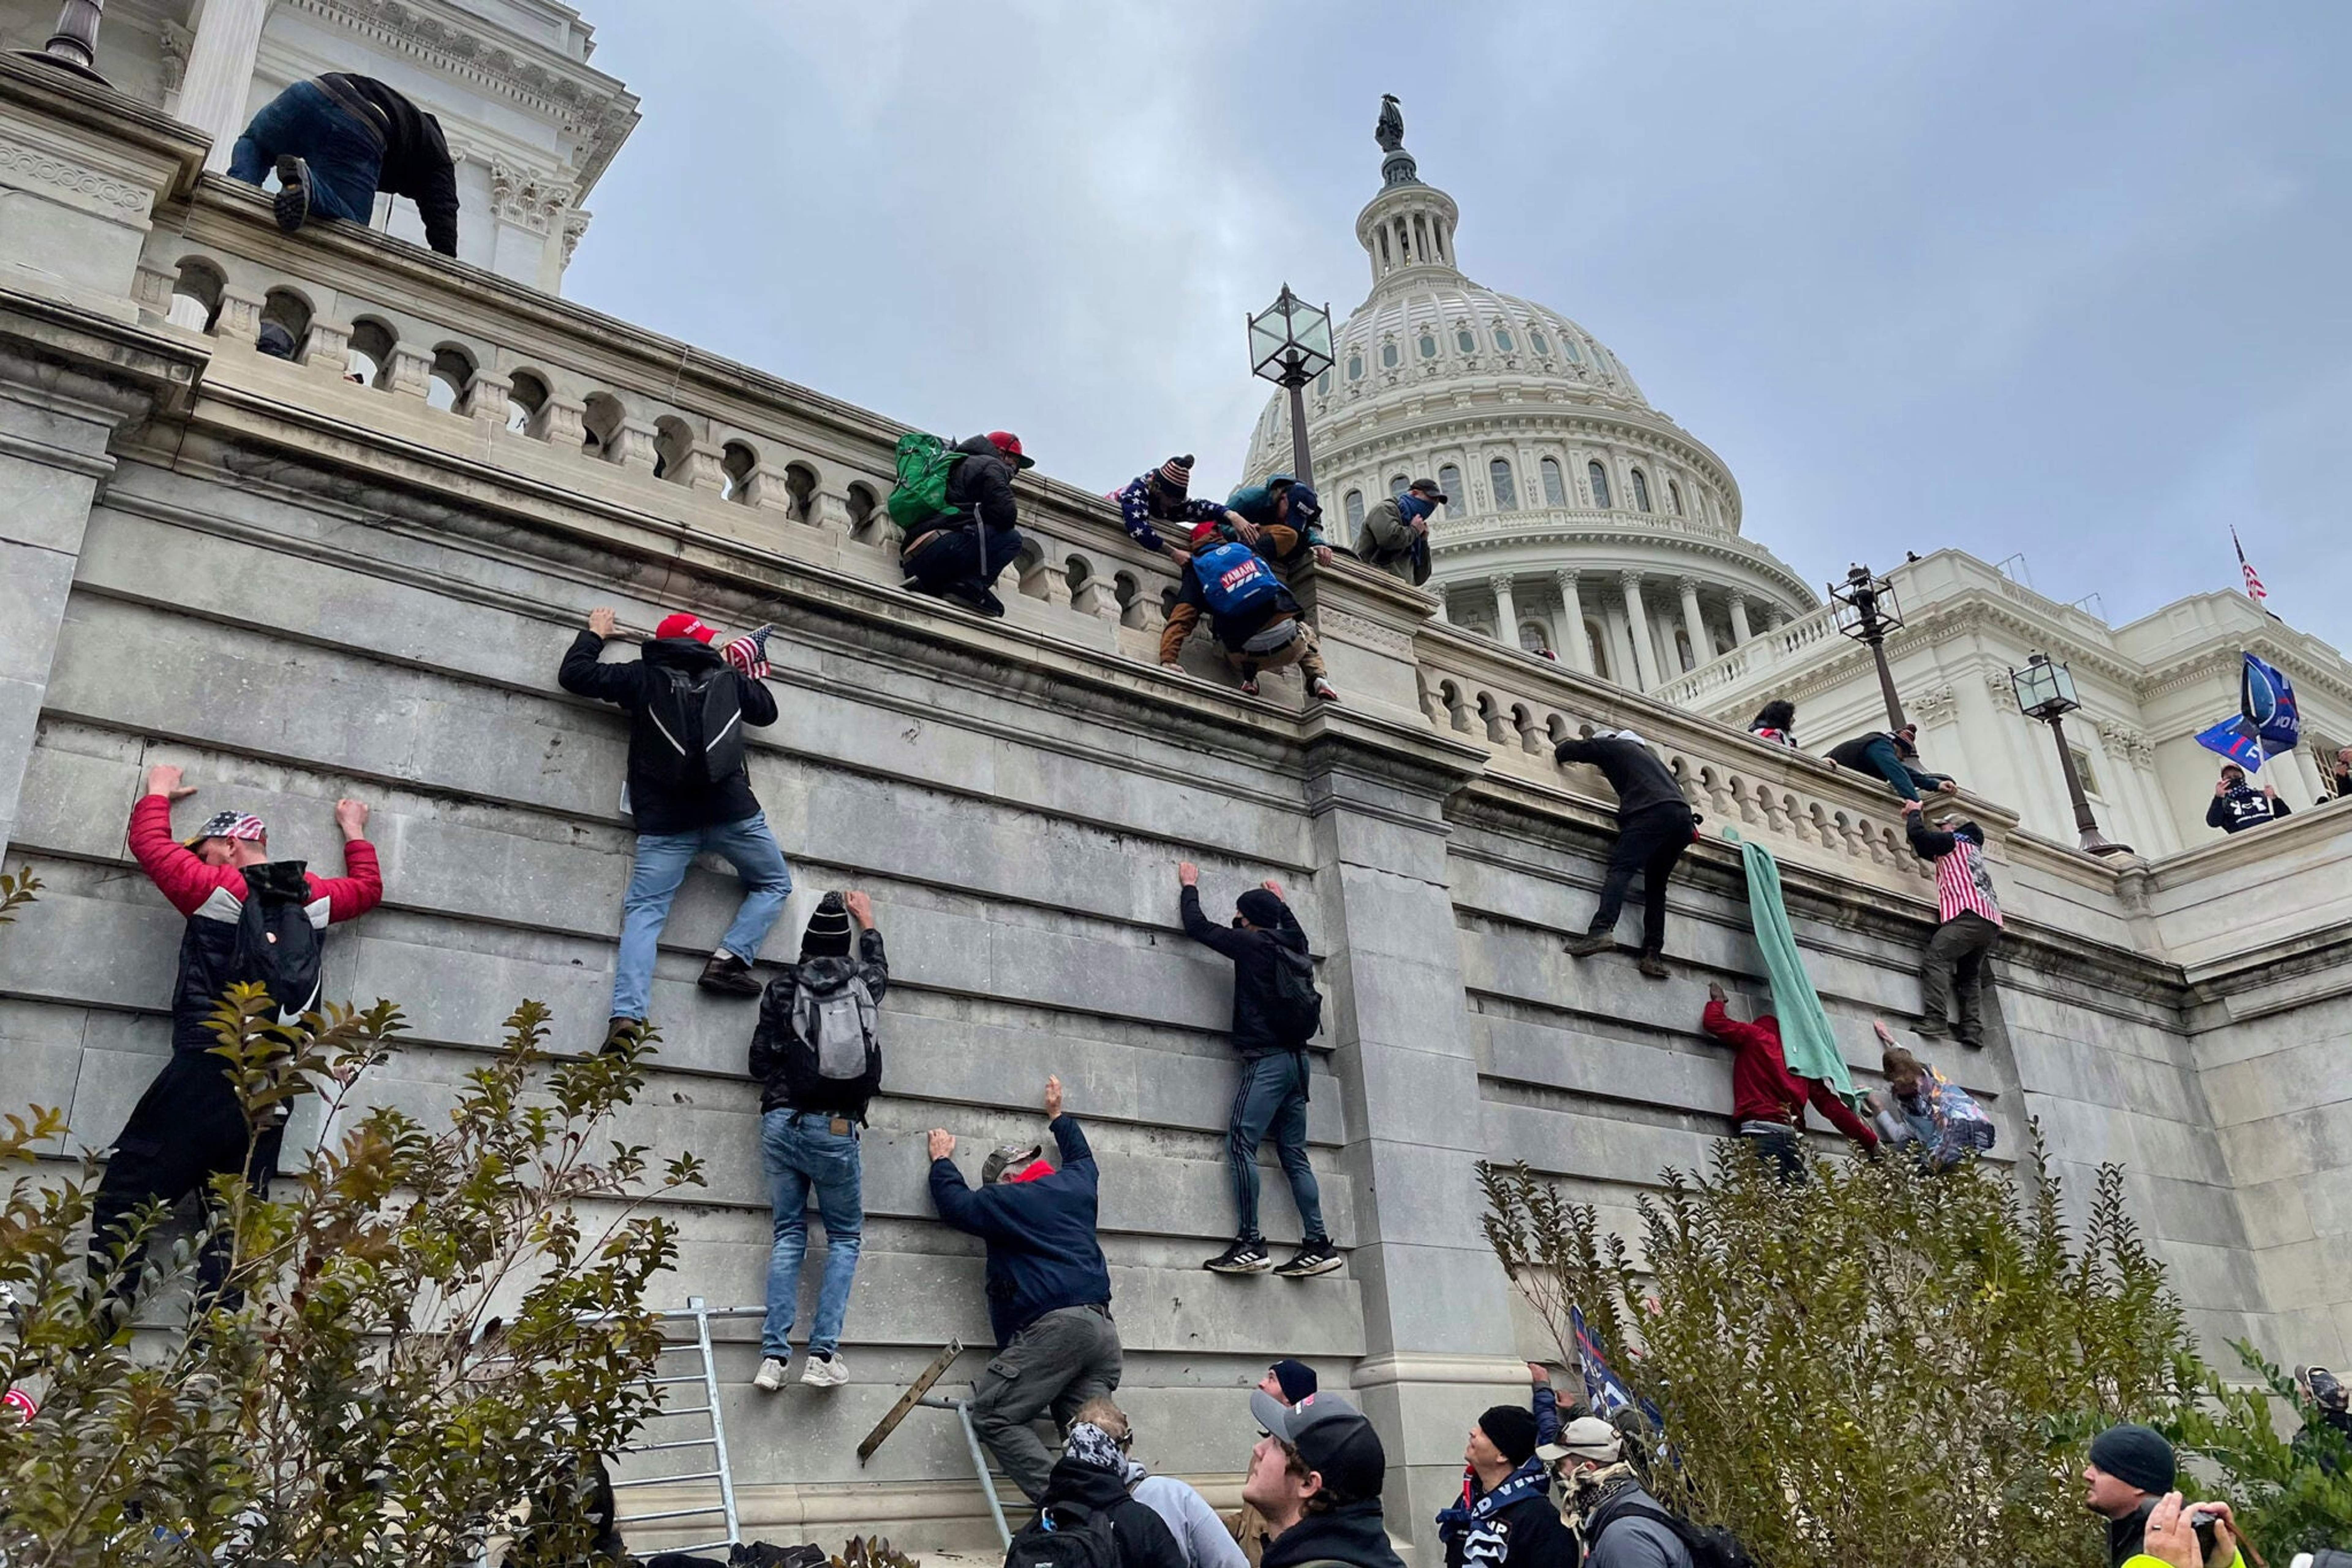 Trump supporters scale the west wall of the Capitol on January 6, 2021.